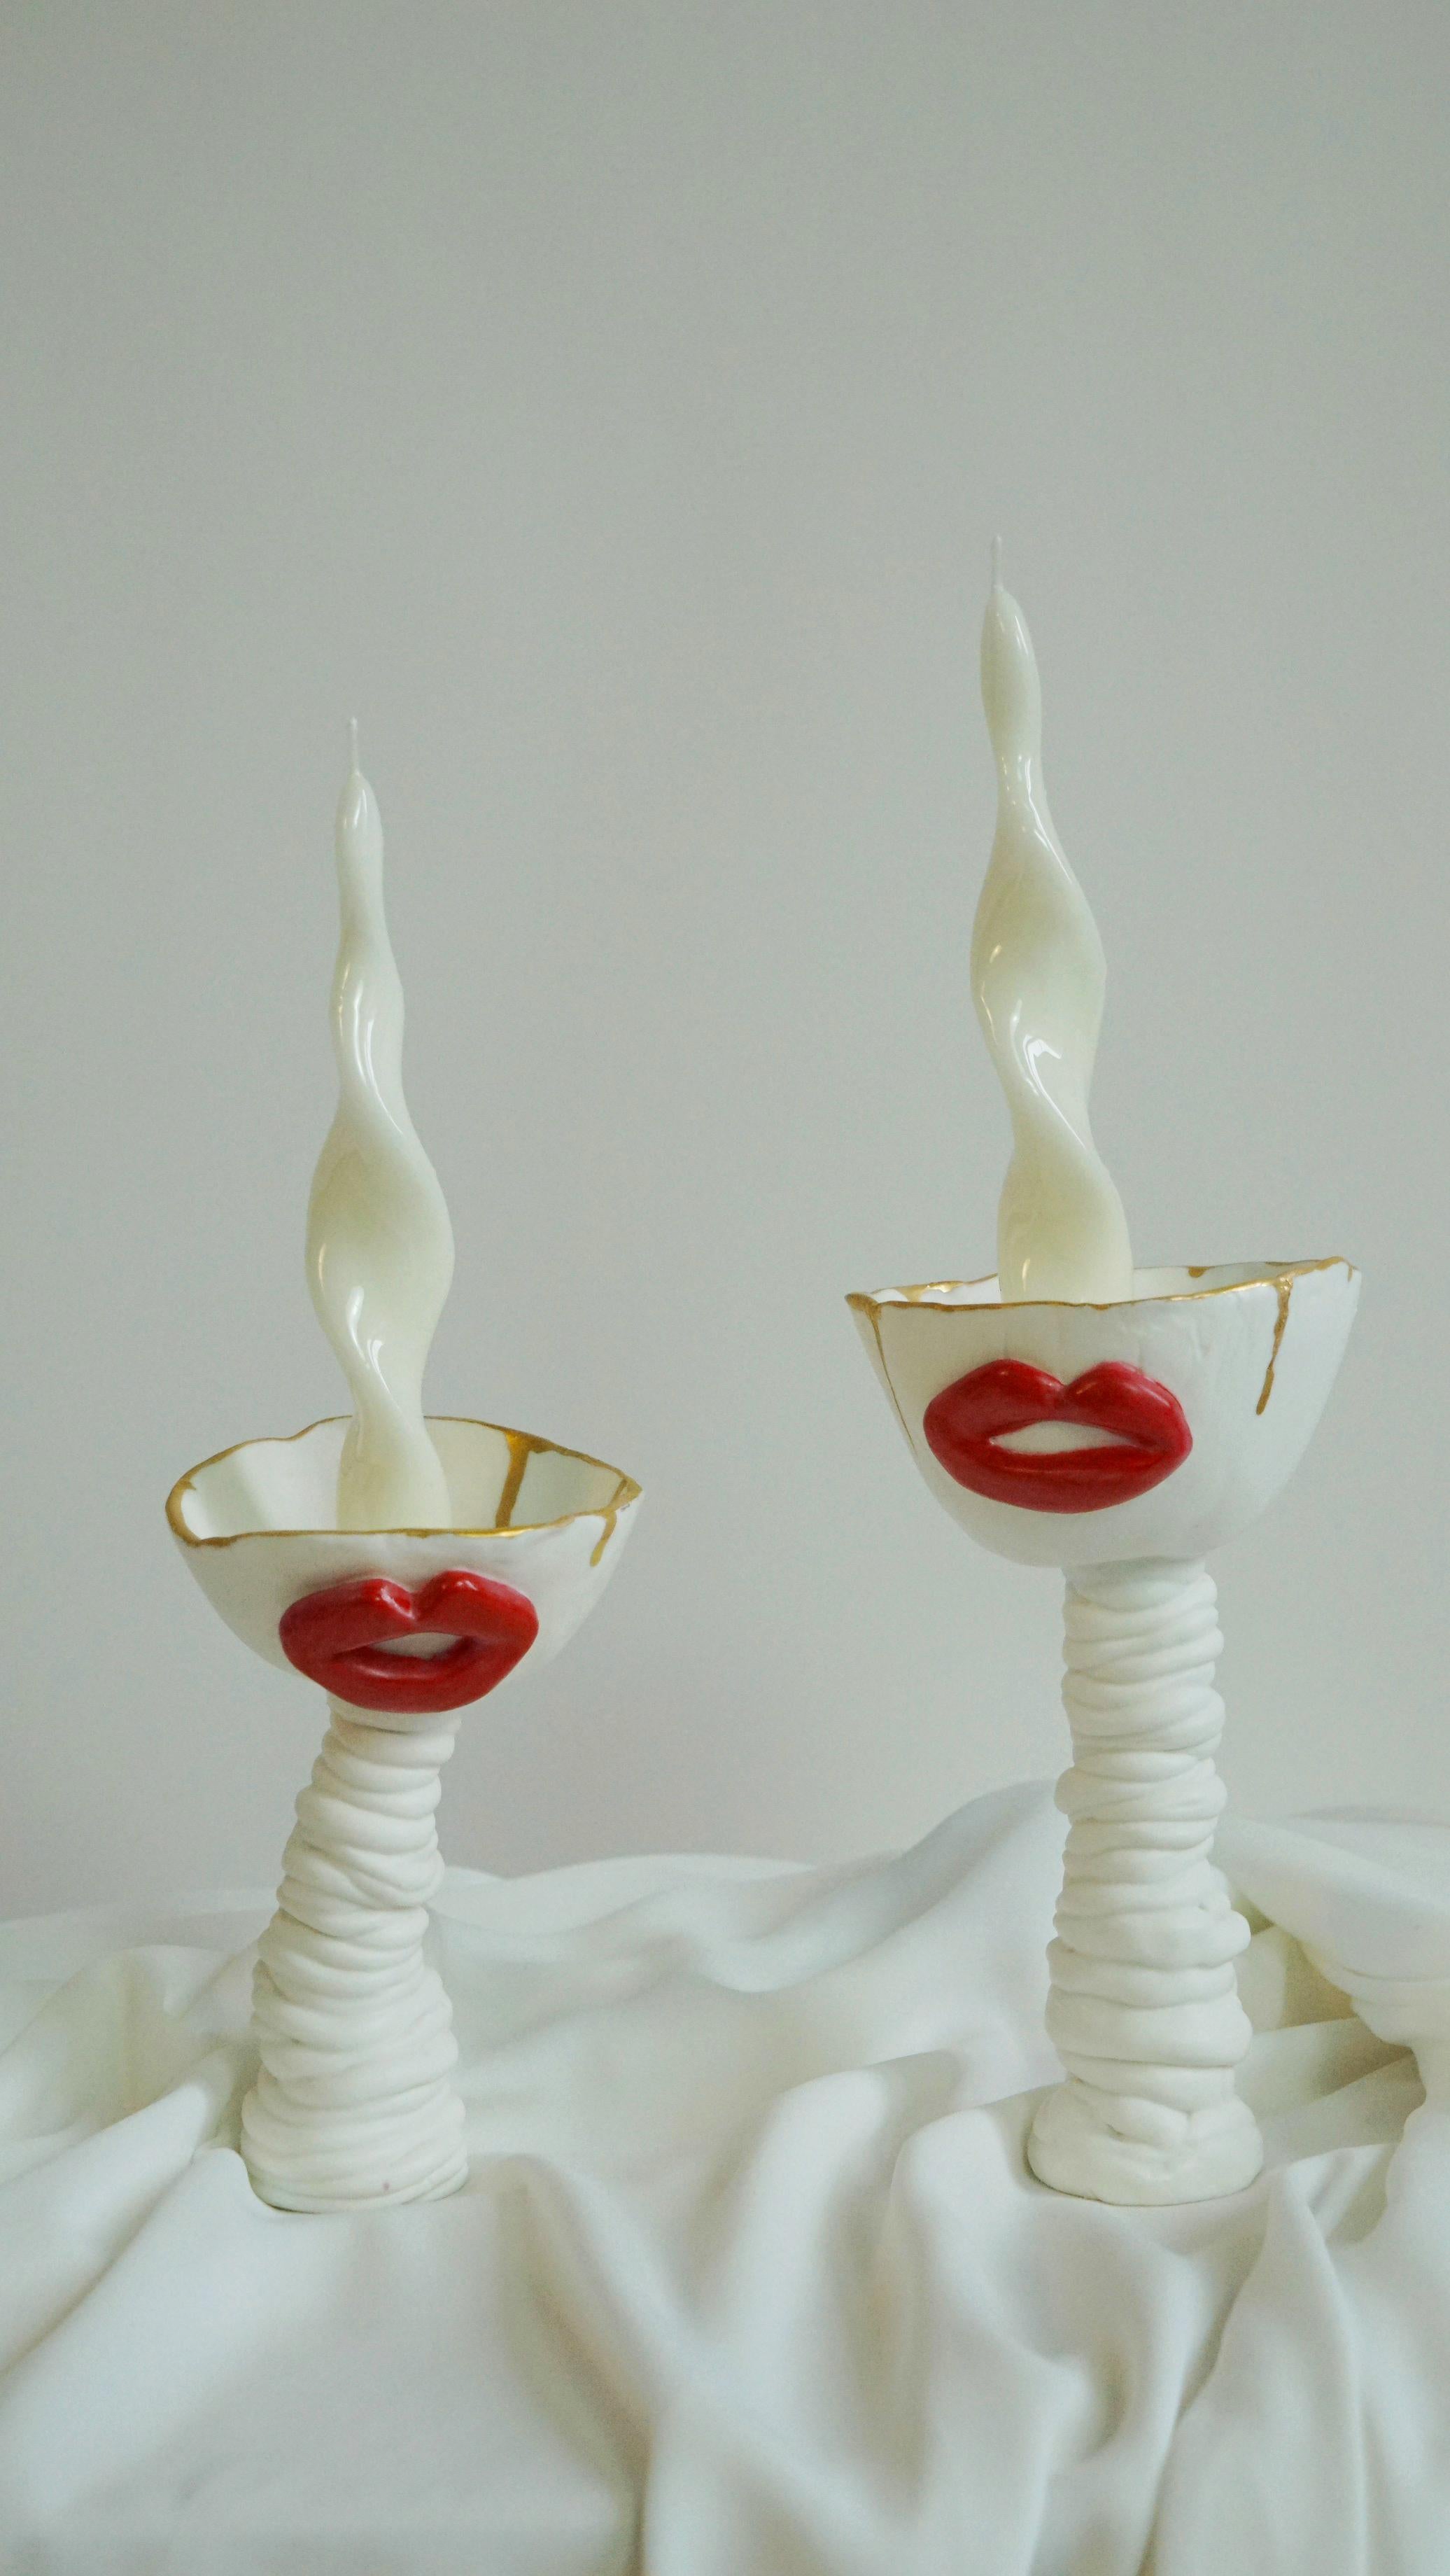 The Lips Collection is an investigation into facial expression, through the lips. 
The artist expressed her fascination with diversity by creating art pieces that focus on the human lips as a sign of diversity and pecularity. 
The Collection is